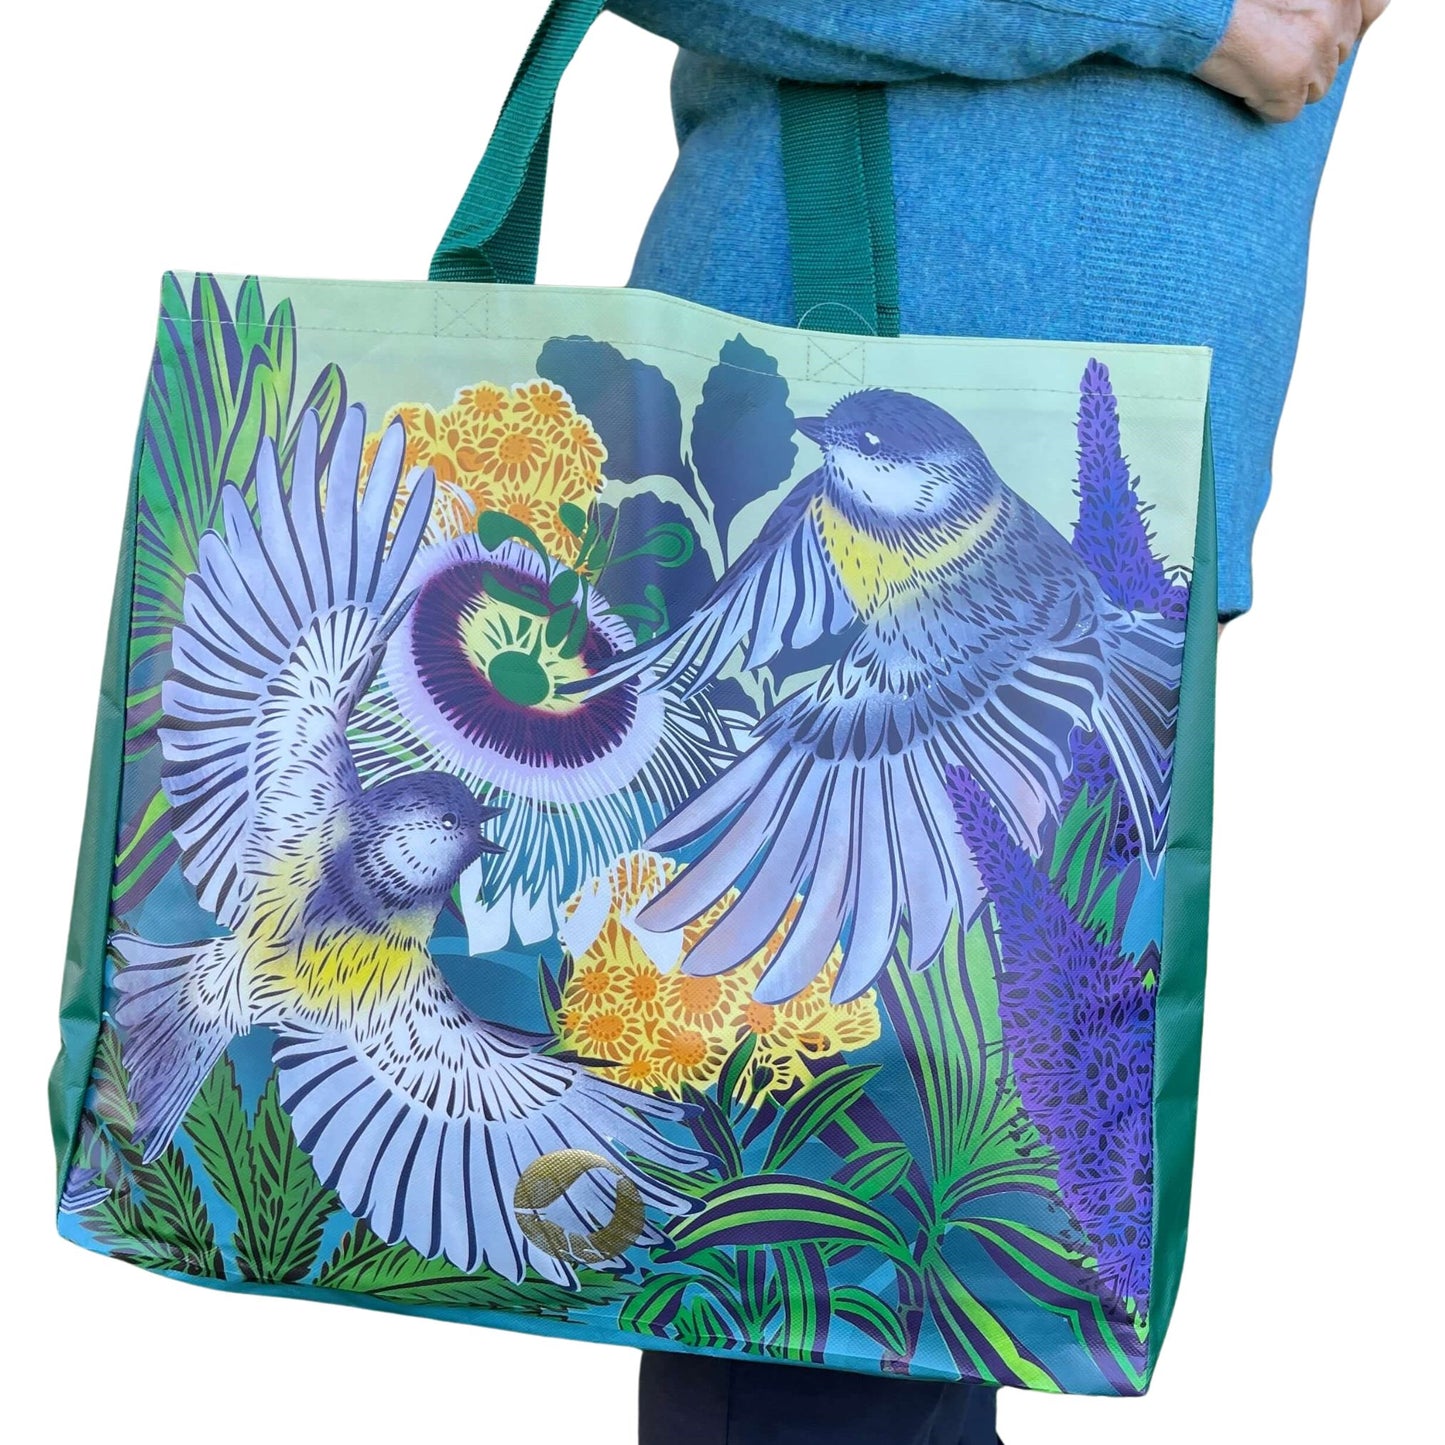 Woman with a tote bag over her arm. The vibrant coloured tote bag features Miromiro birds by artist Flox.